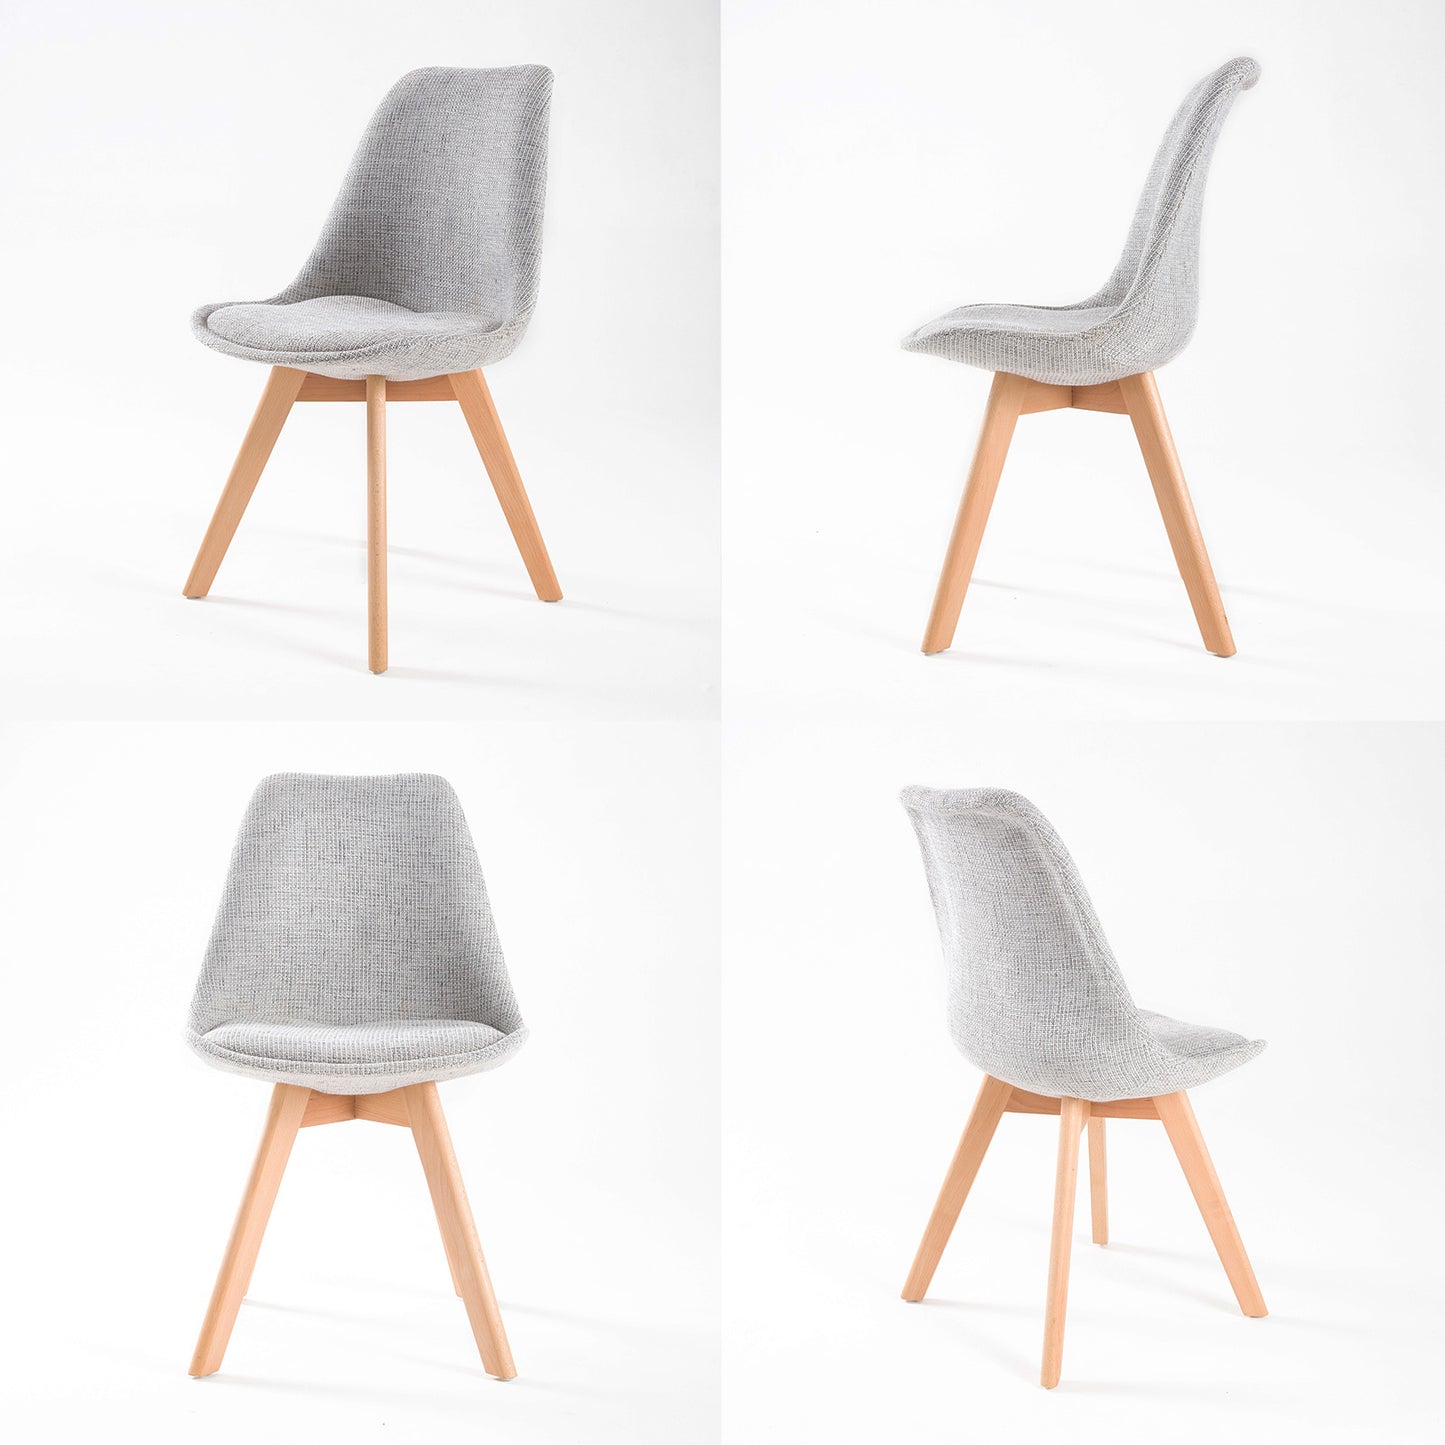 Fleur Set of 2 Retro Dining Cafe Chair Padded Seat - Grey